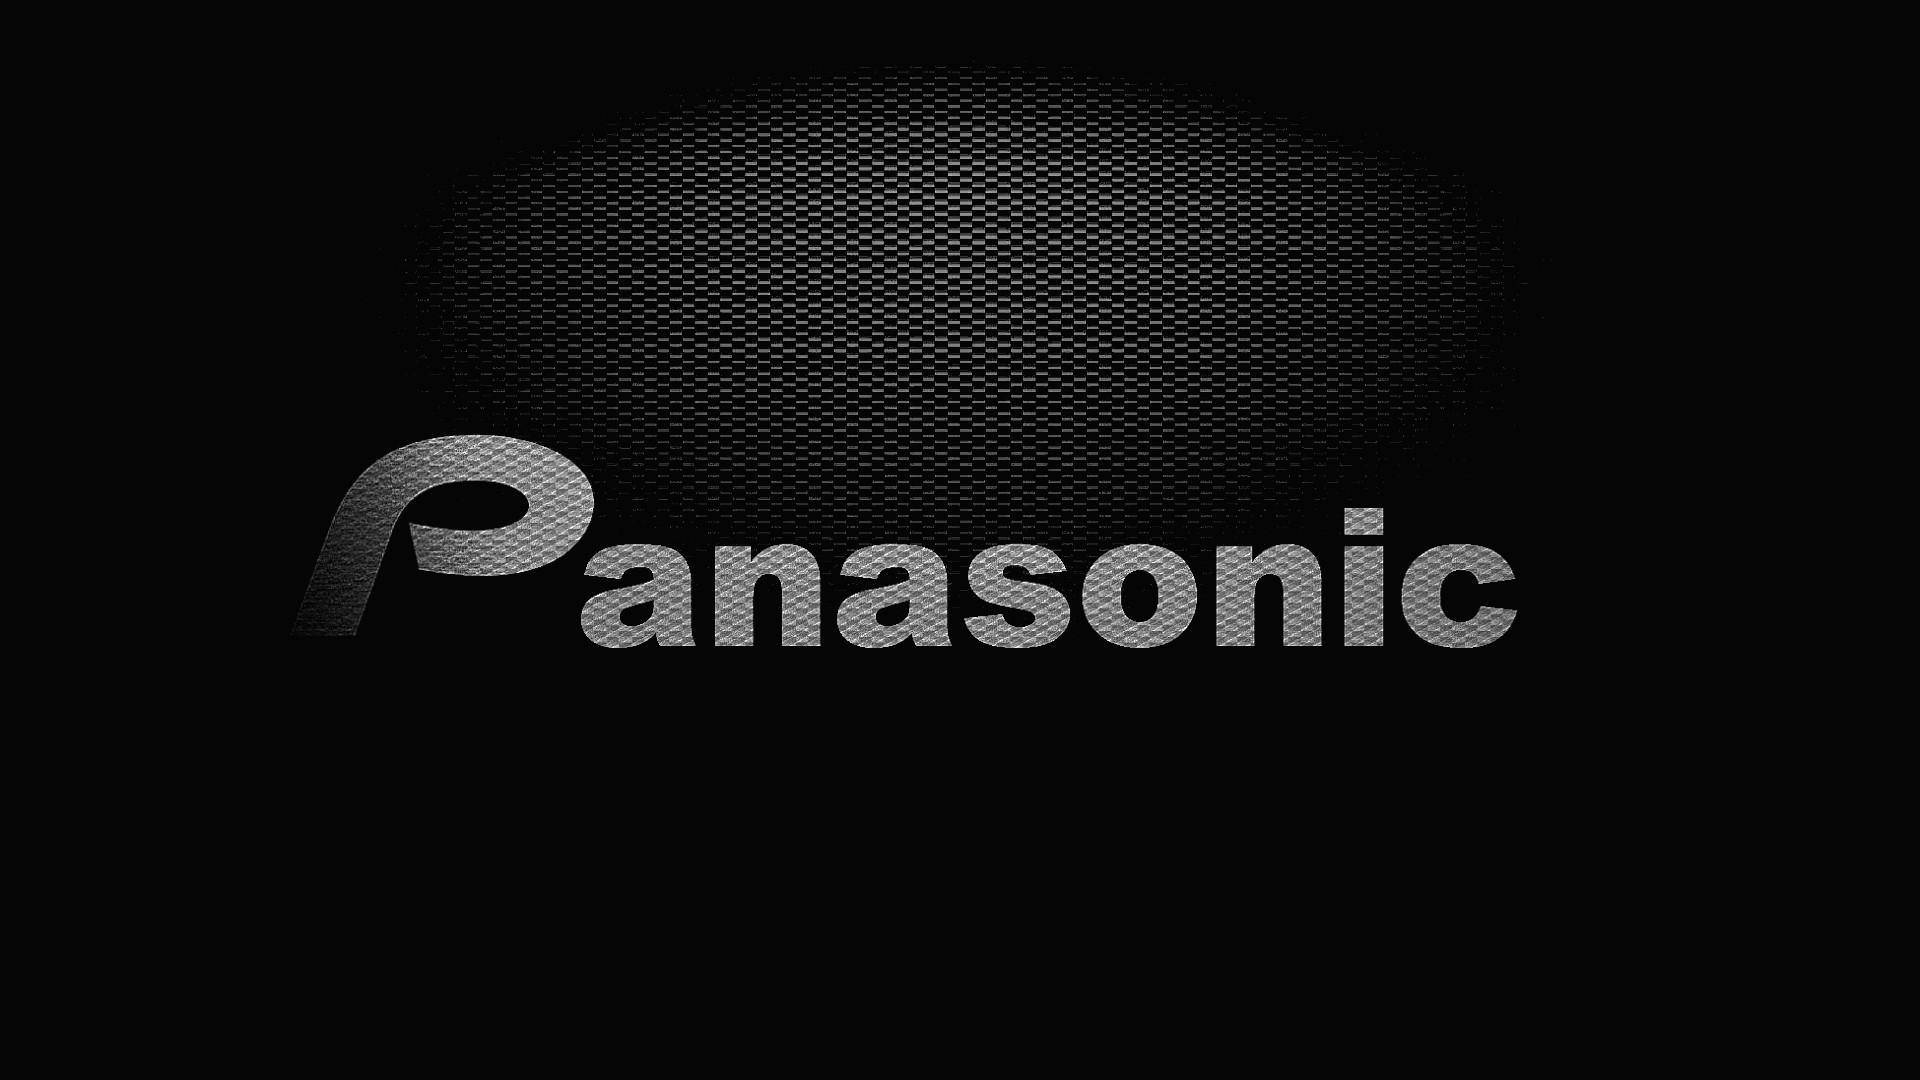 Gråpanasonic I Svart. (this Could Be A Potential Title Or Description For A Computer Or Mobile Wallpaper Featuring A Grey Image Of A Panasonic Product On A Black Background.) Wallpaper